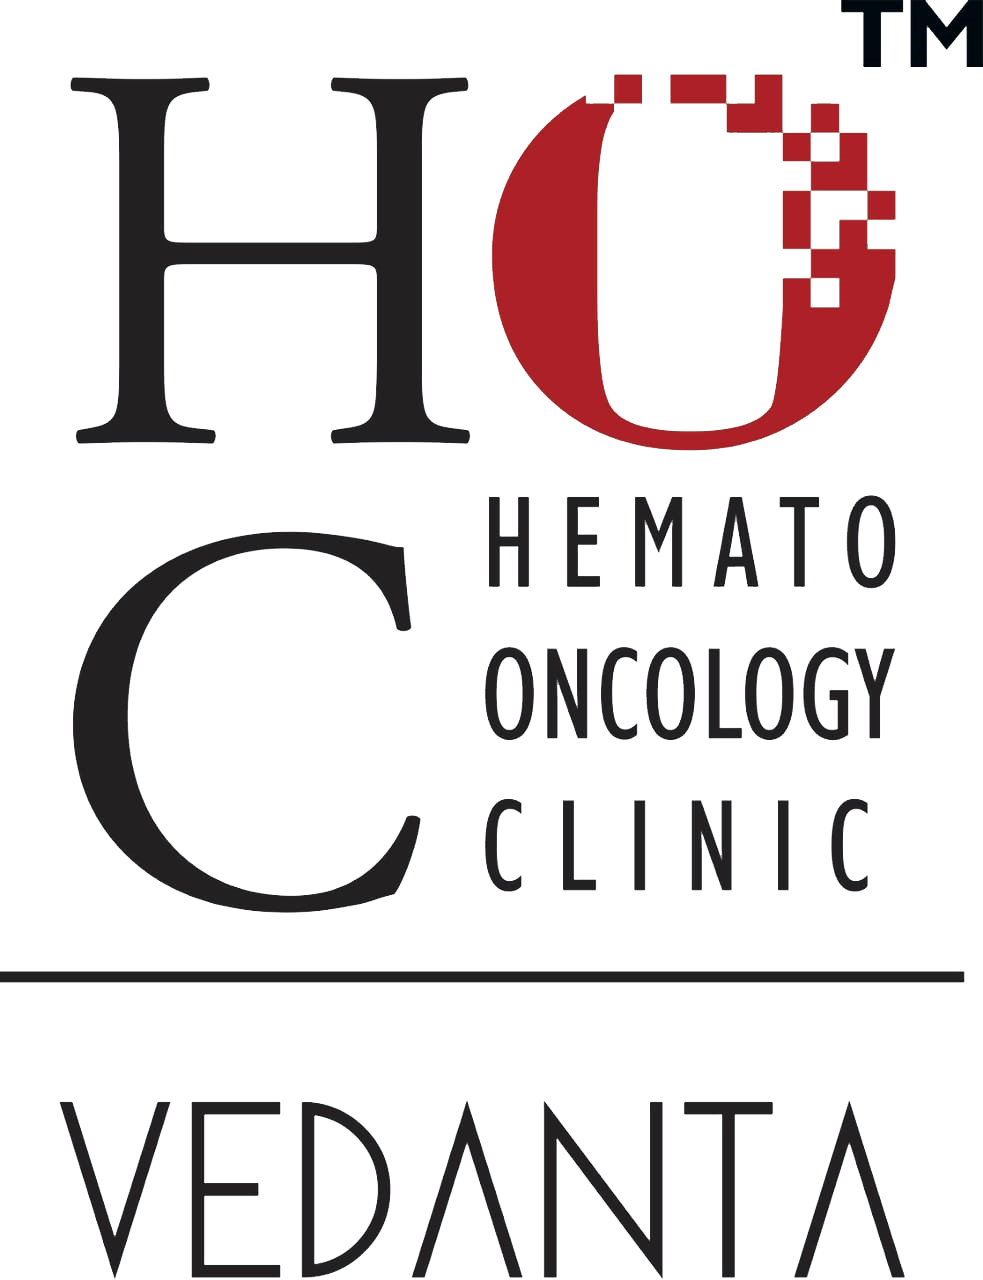 Hemato Oncology Clinic